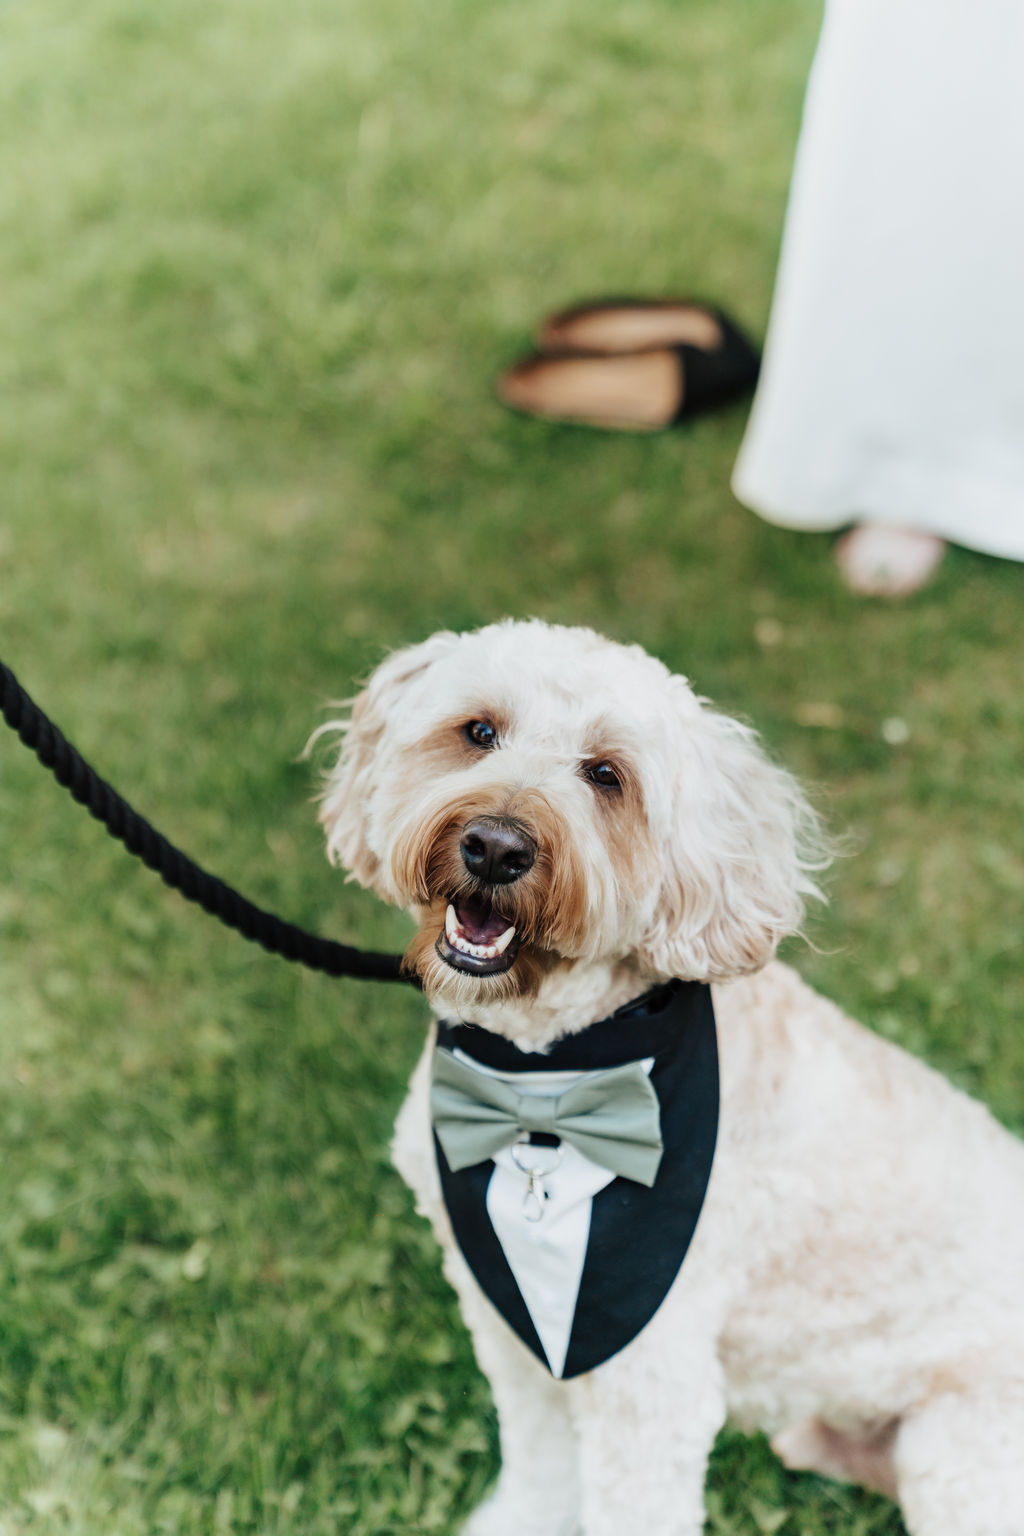 Cobberdog dressed in a tux vest with a green bowtie.